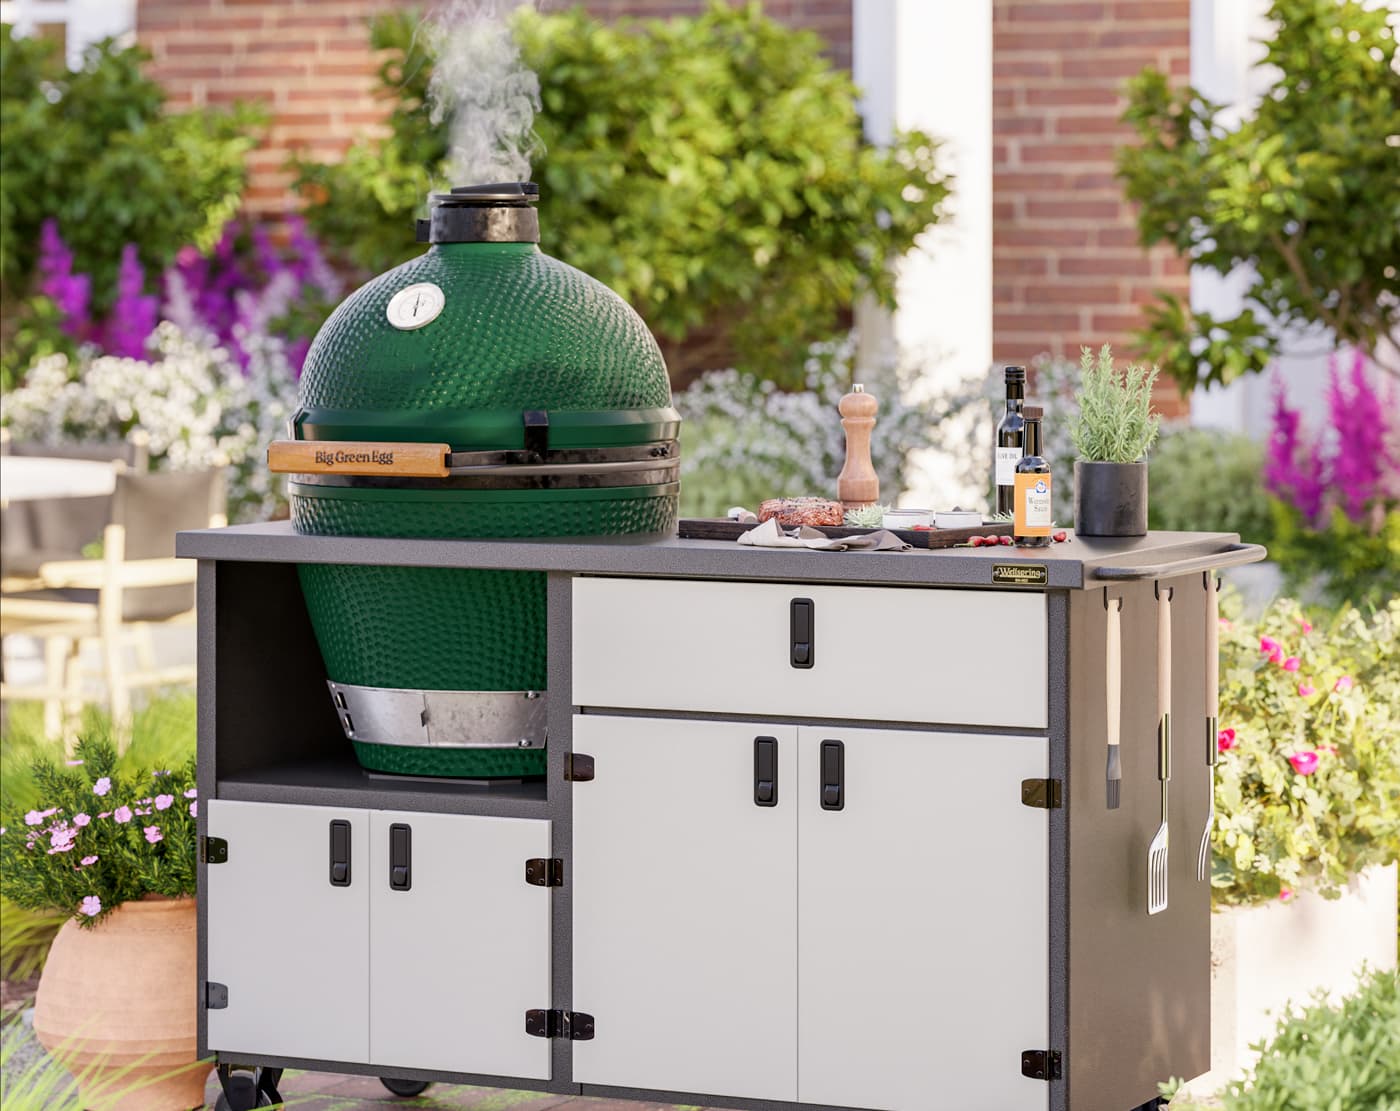 Green ceramic grill on outdoor kitchen cabinet